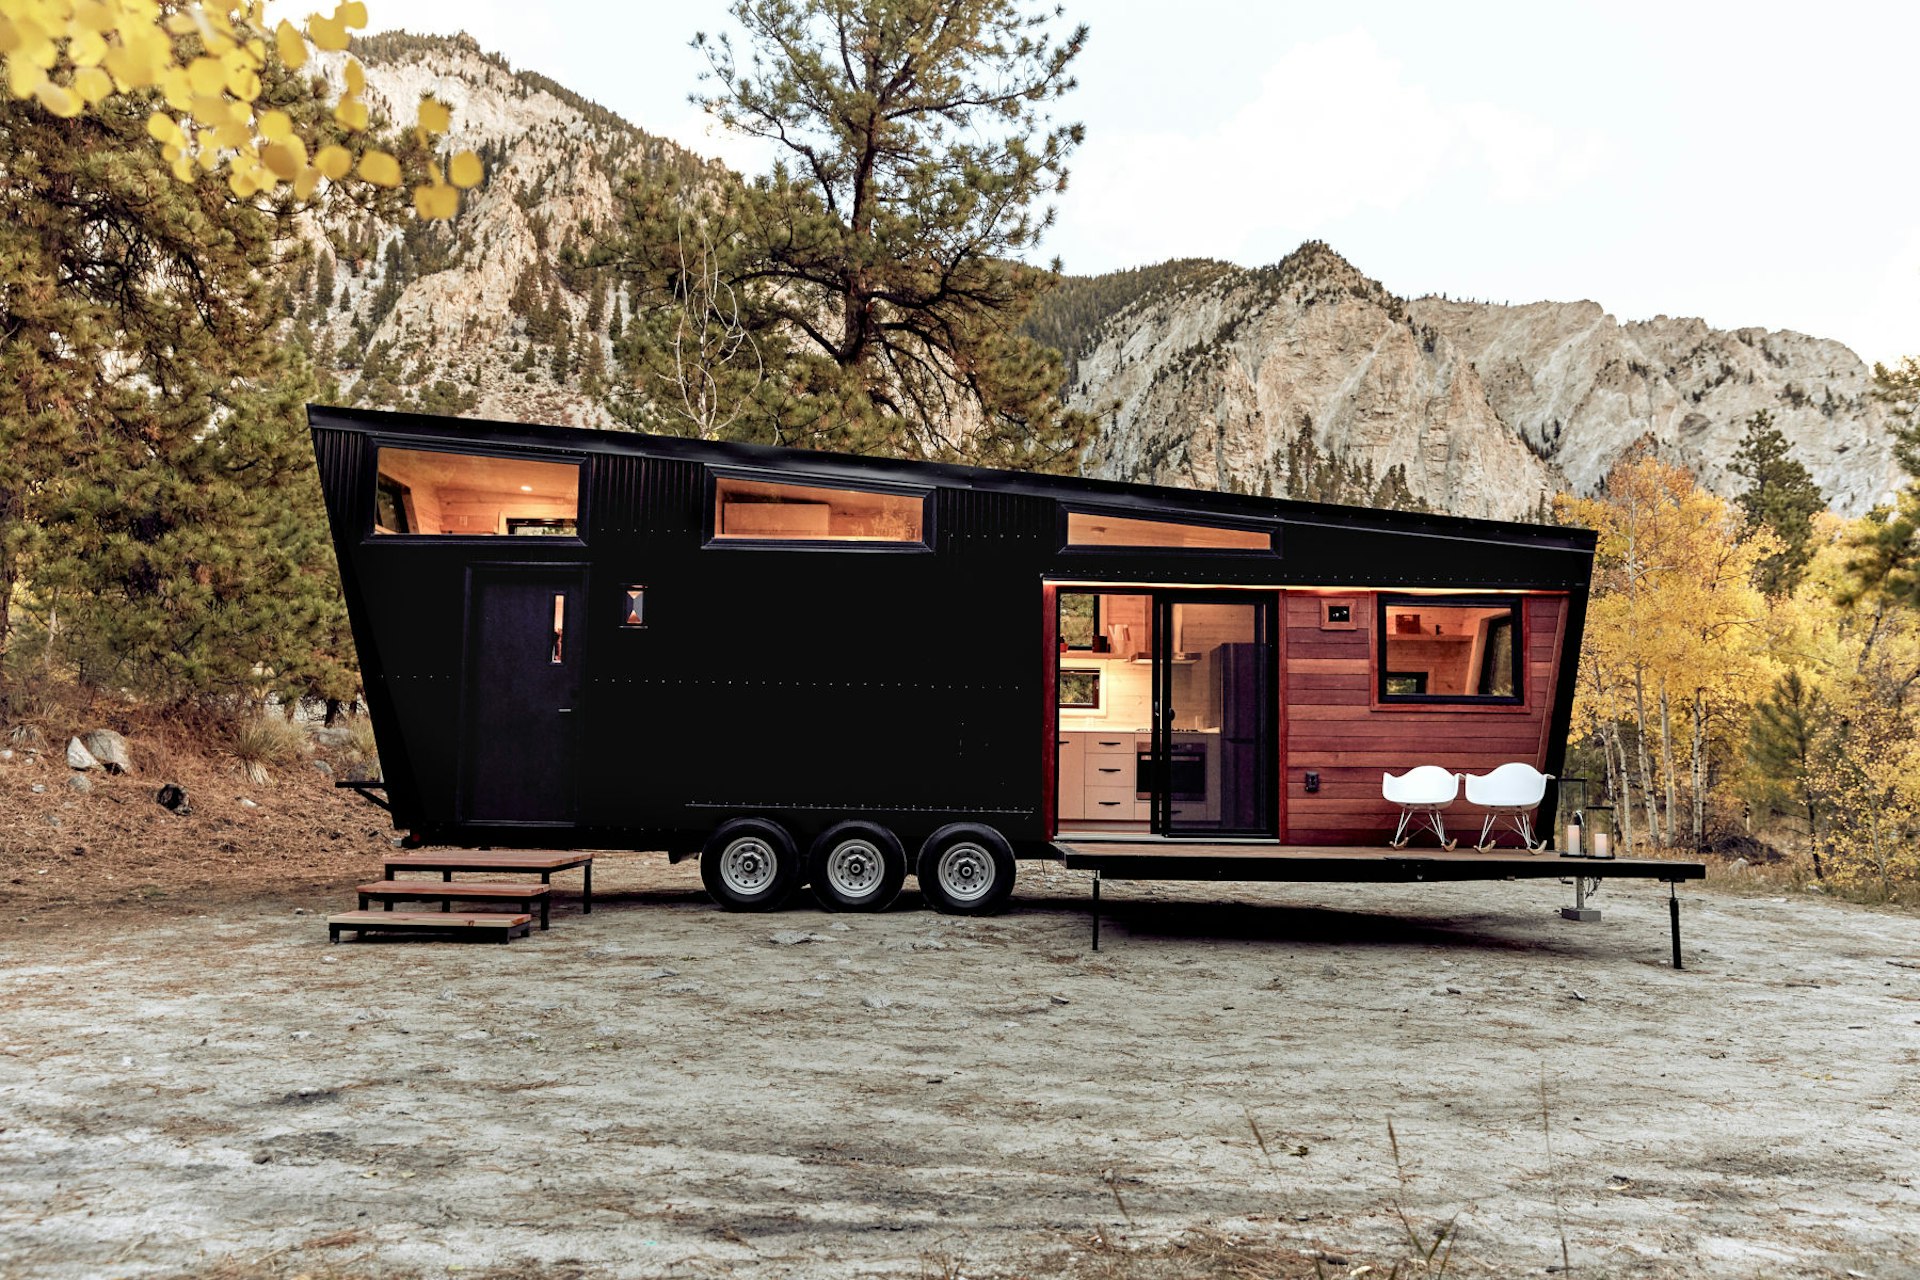 A mid-century modern inspired trailer in the wilderness.